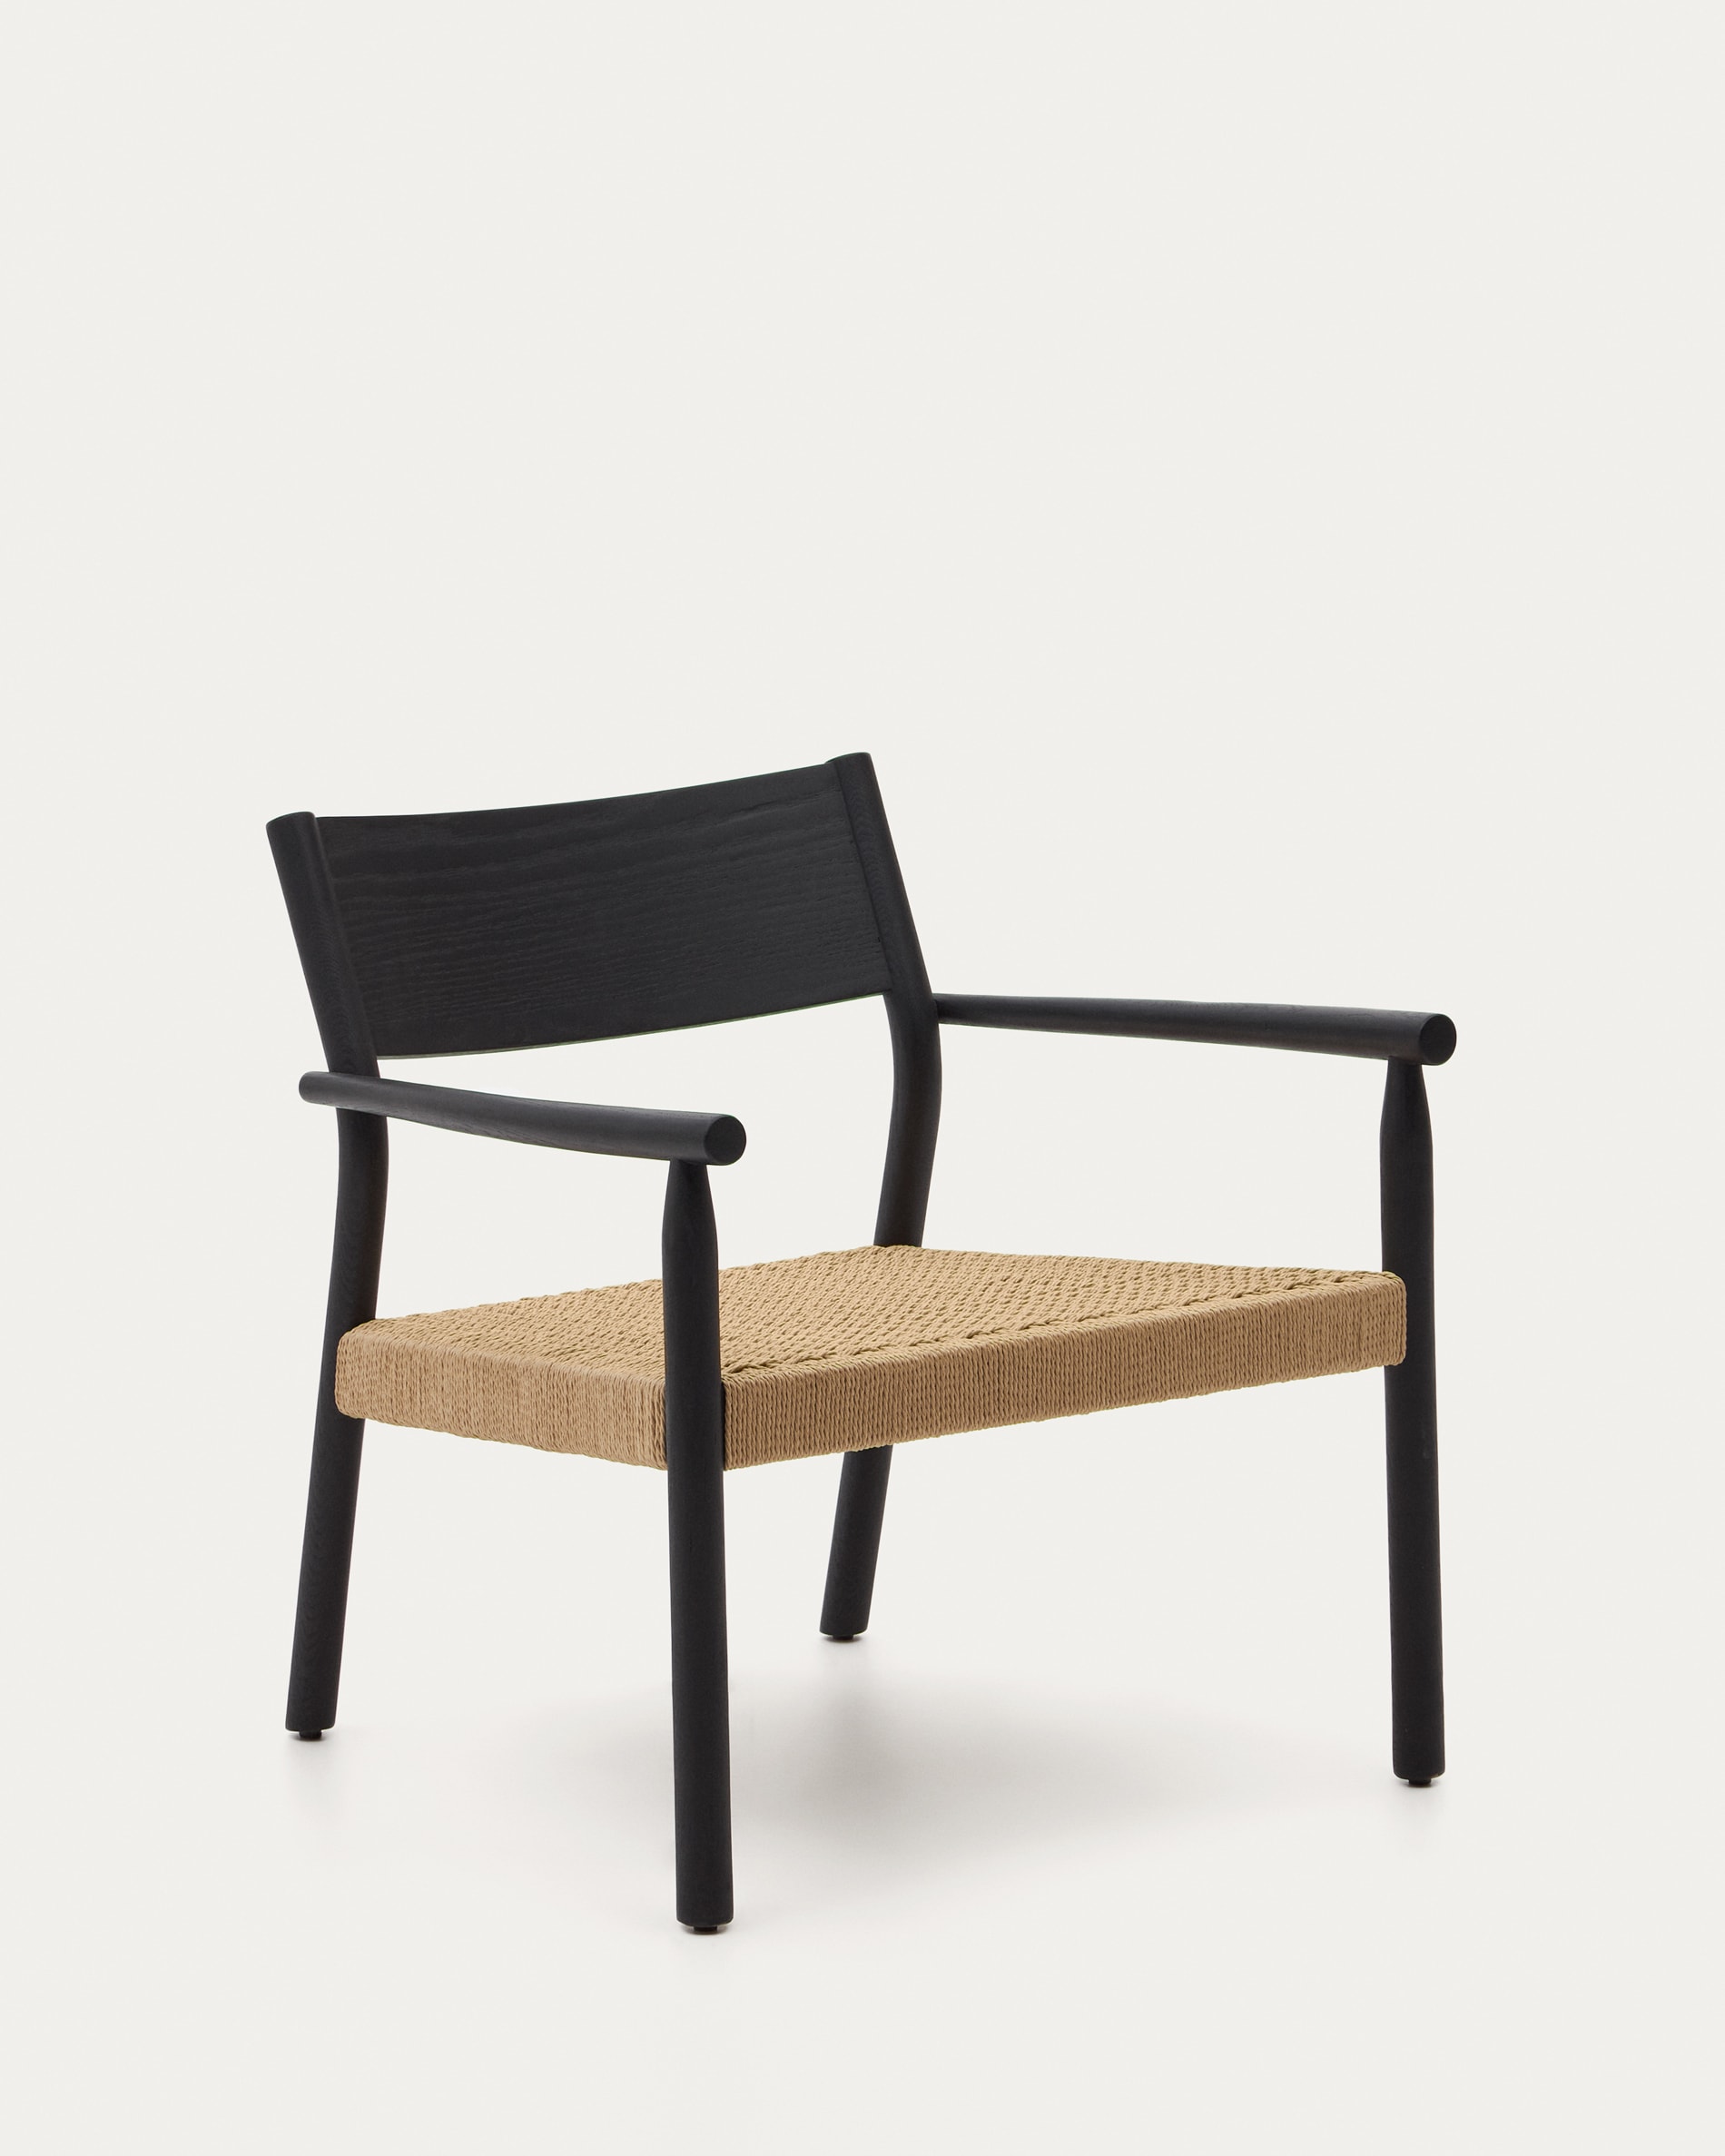 Yalia armchair in solid oak 100% FSC with a black finish and paper rope seat